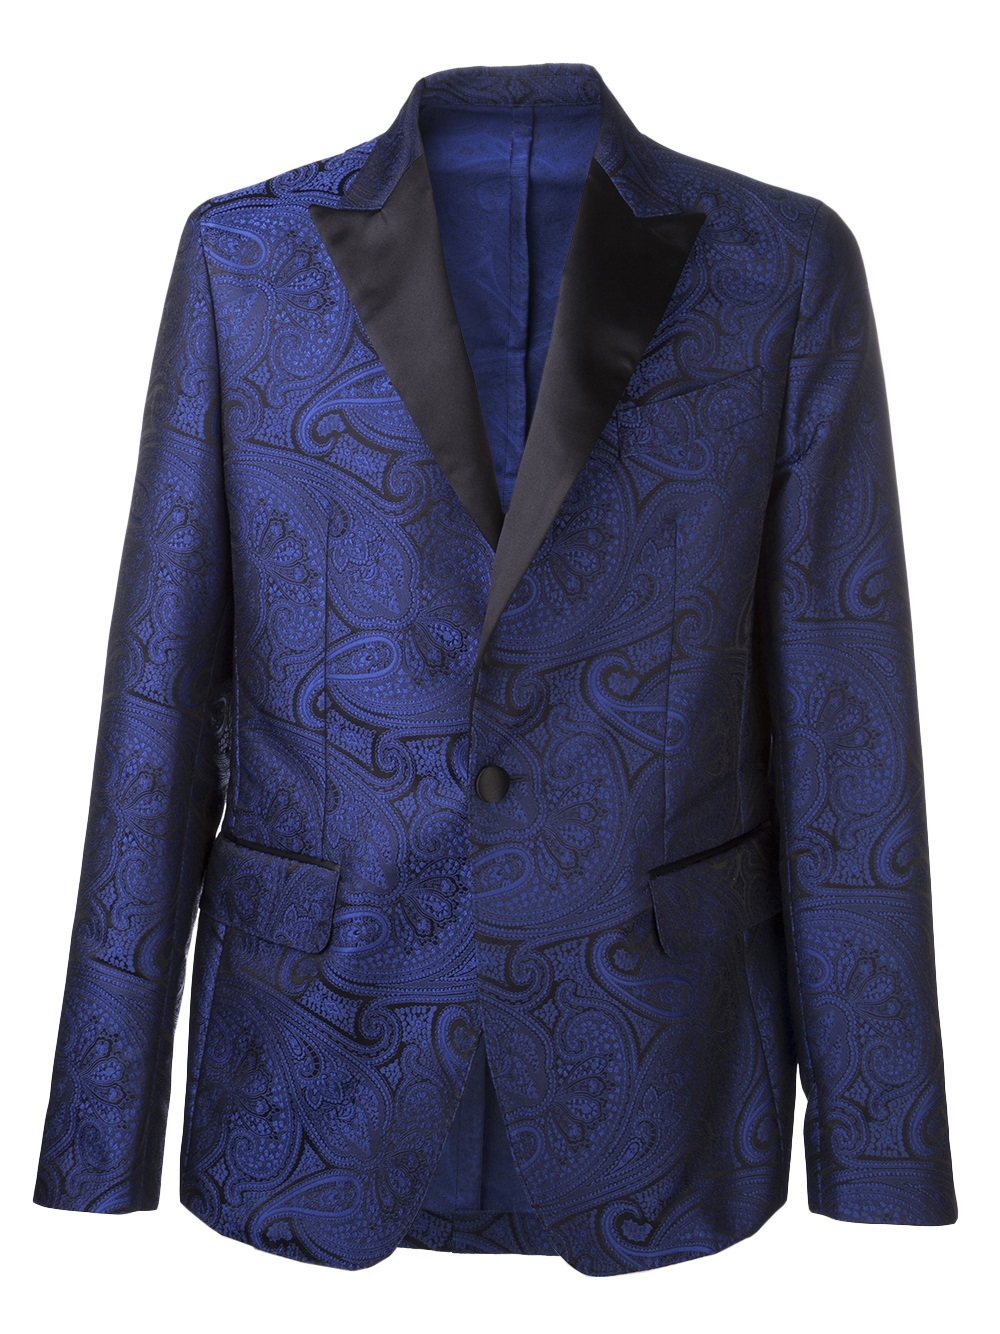 Lyst - Dsquared² Paisley Print Jacket in Blue for Men